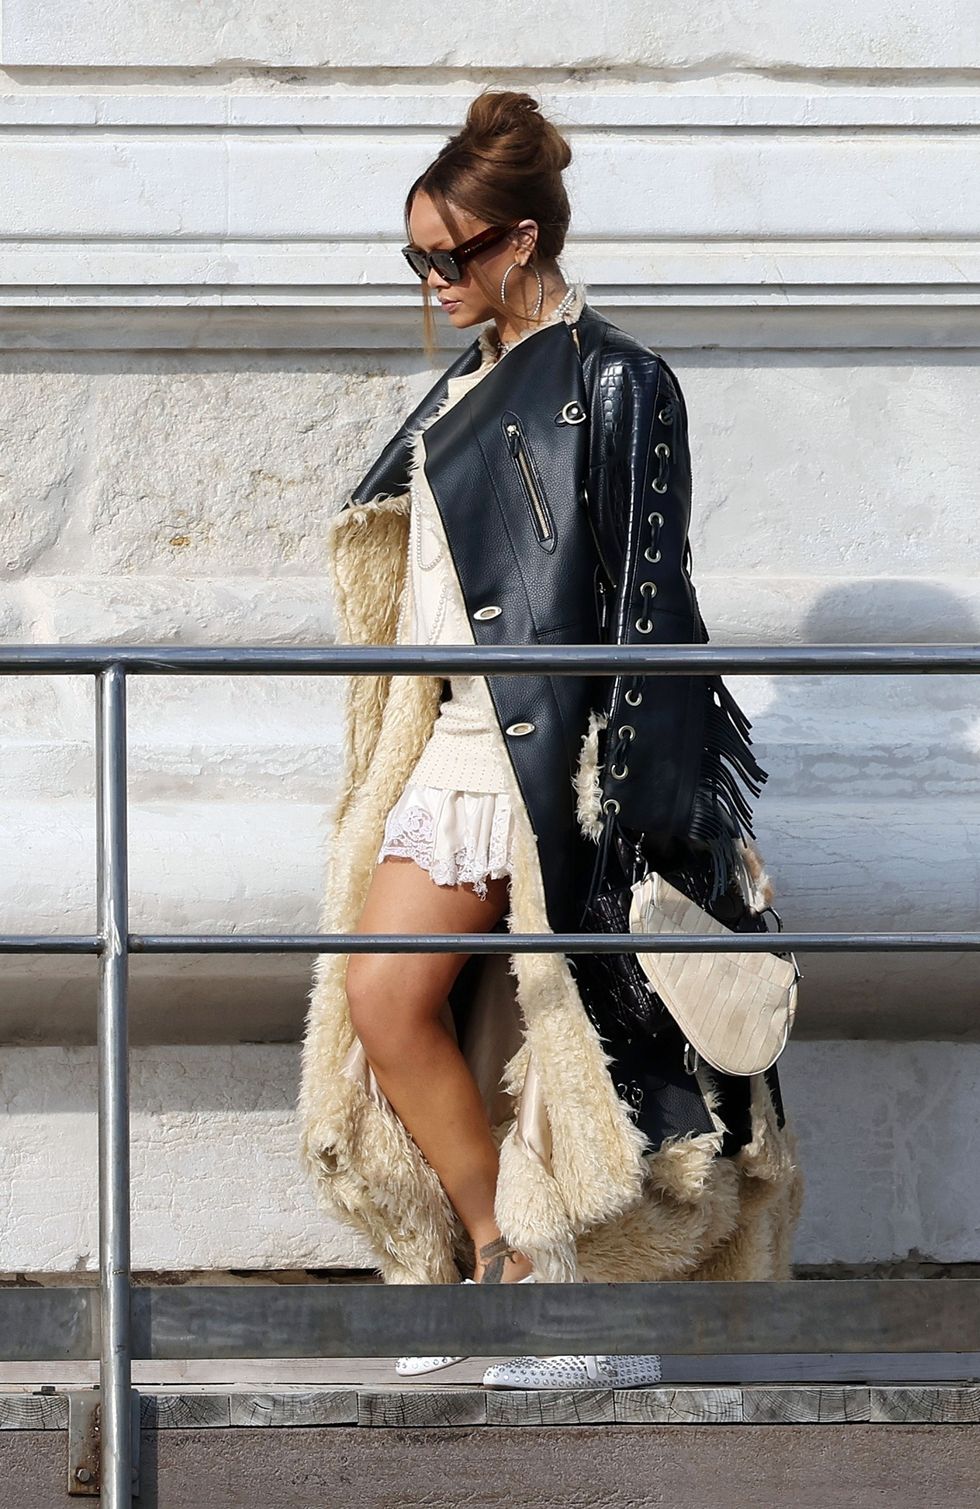 Rihanna’s Edgy Shearling-Lined Leather Coat Is Making Me Wish for a Longer Winter